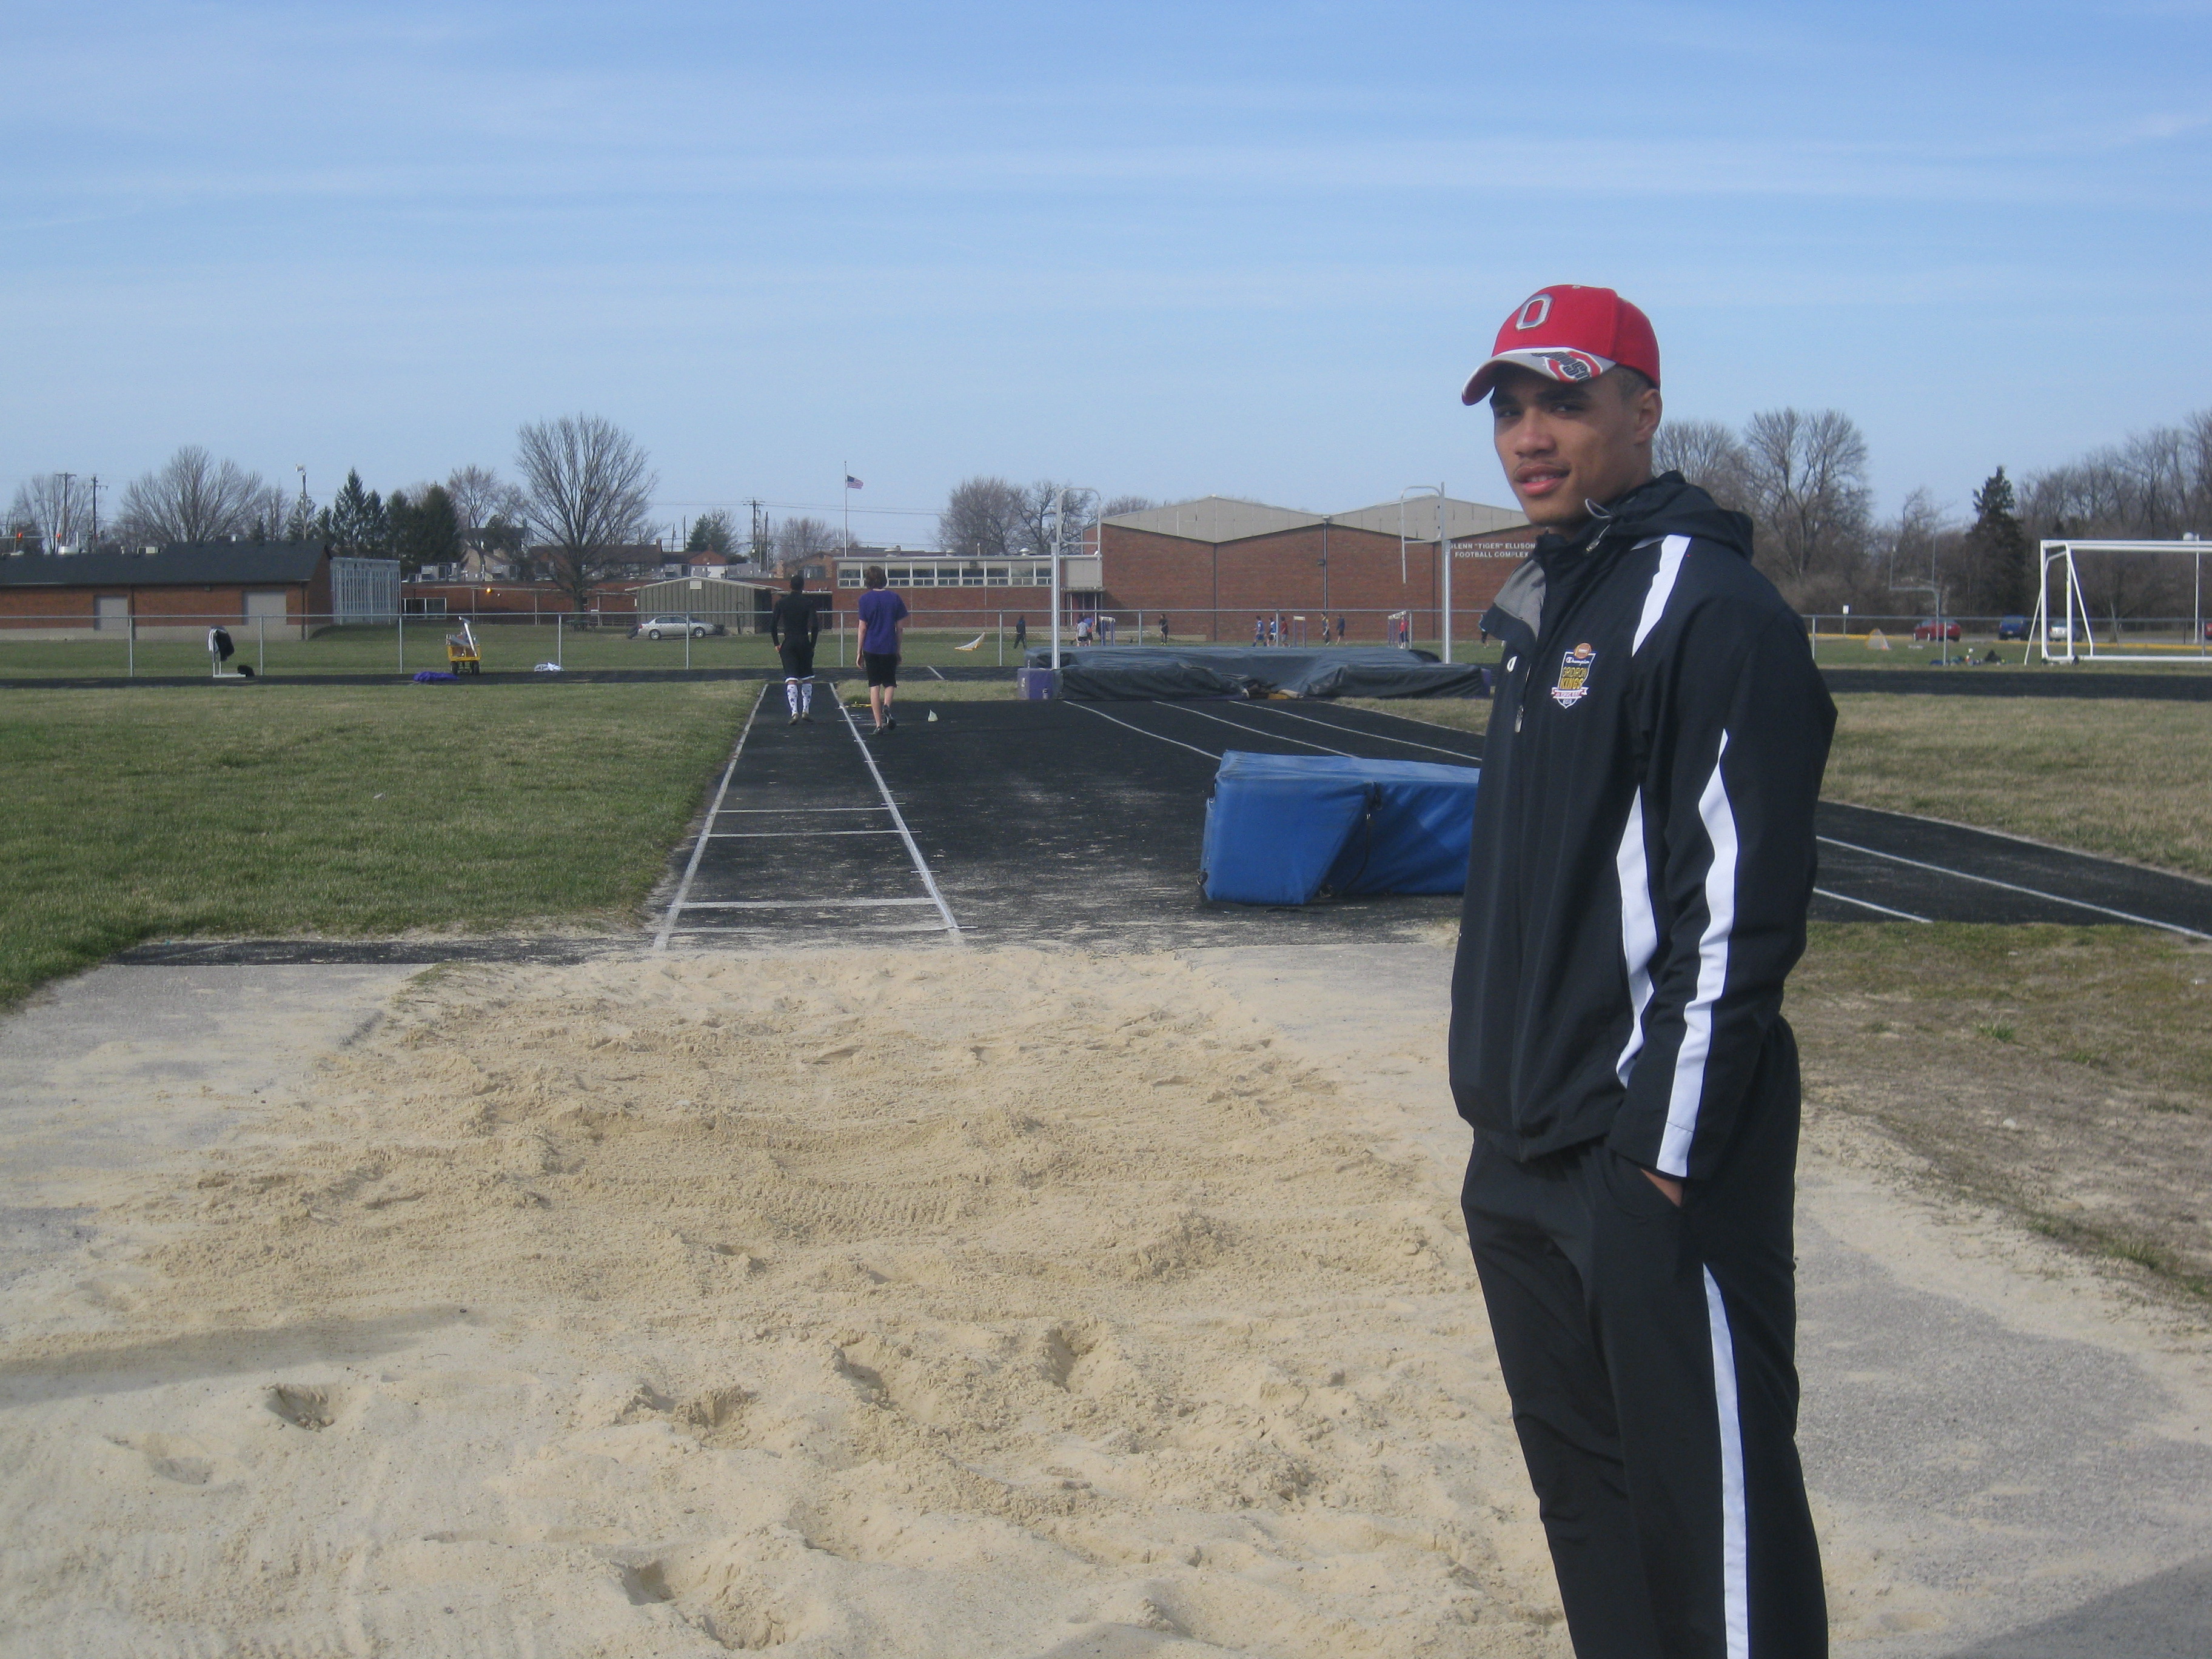 Middletown senior Jalin MArshall wants to defend his state championship in the Division I long jump. He also has a goal of winning state titles in the high jump and 100-meter dash.